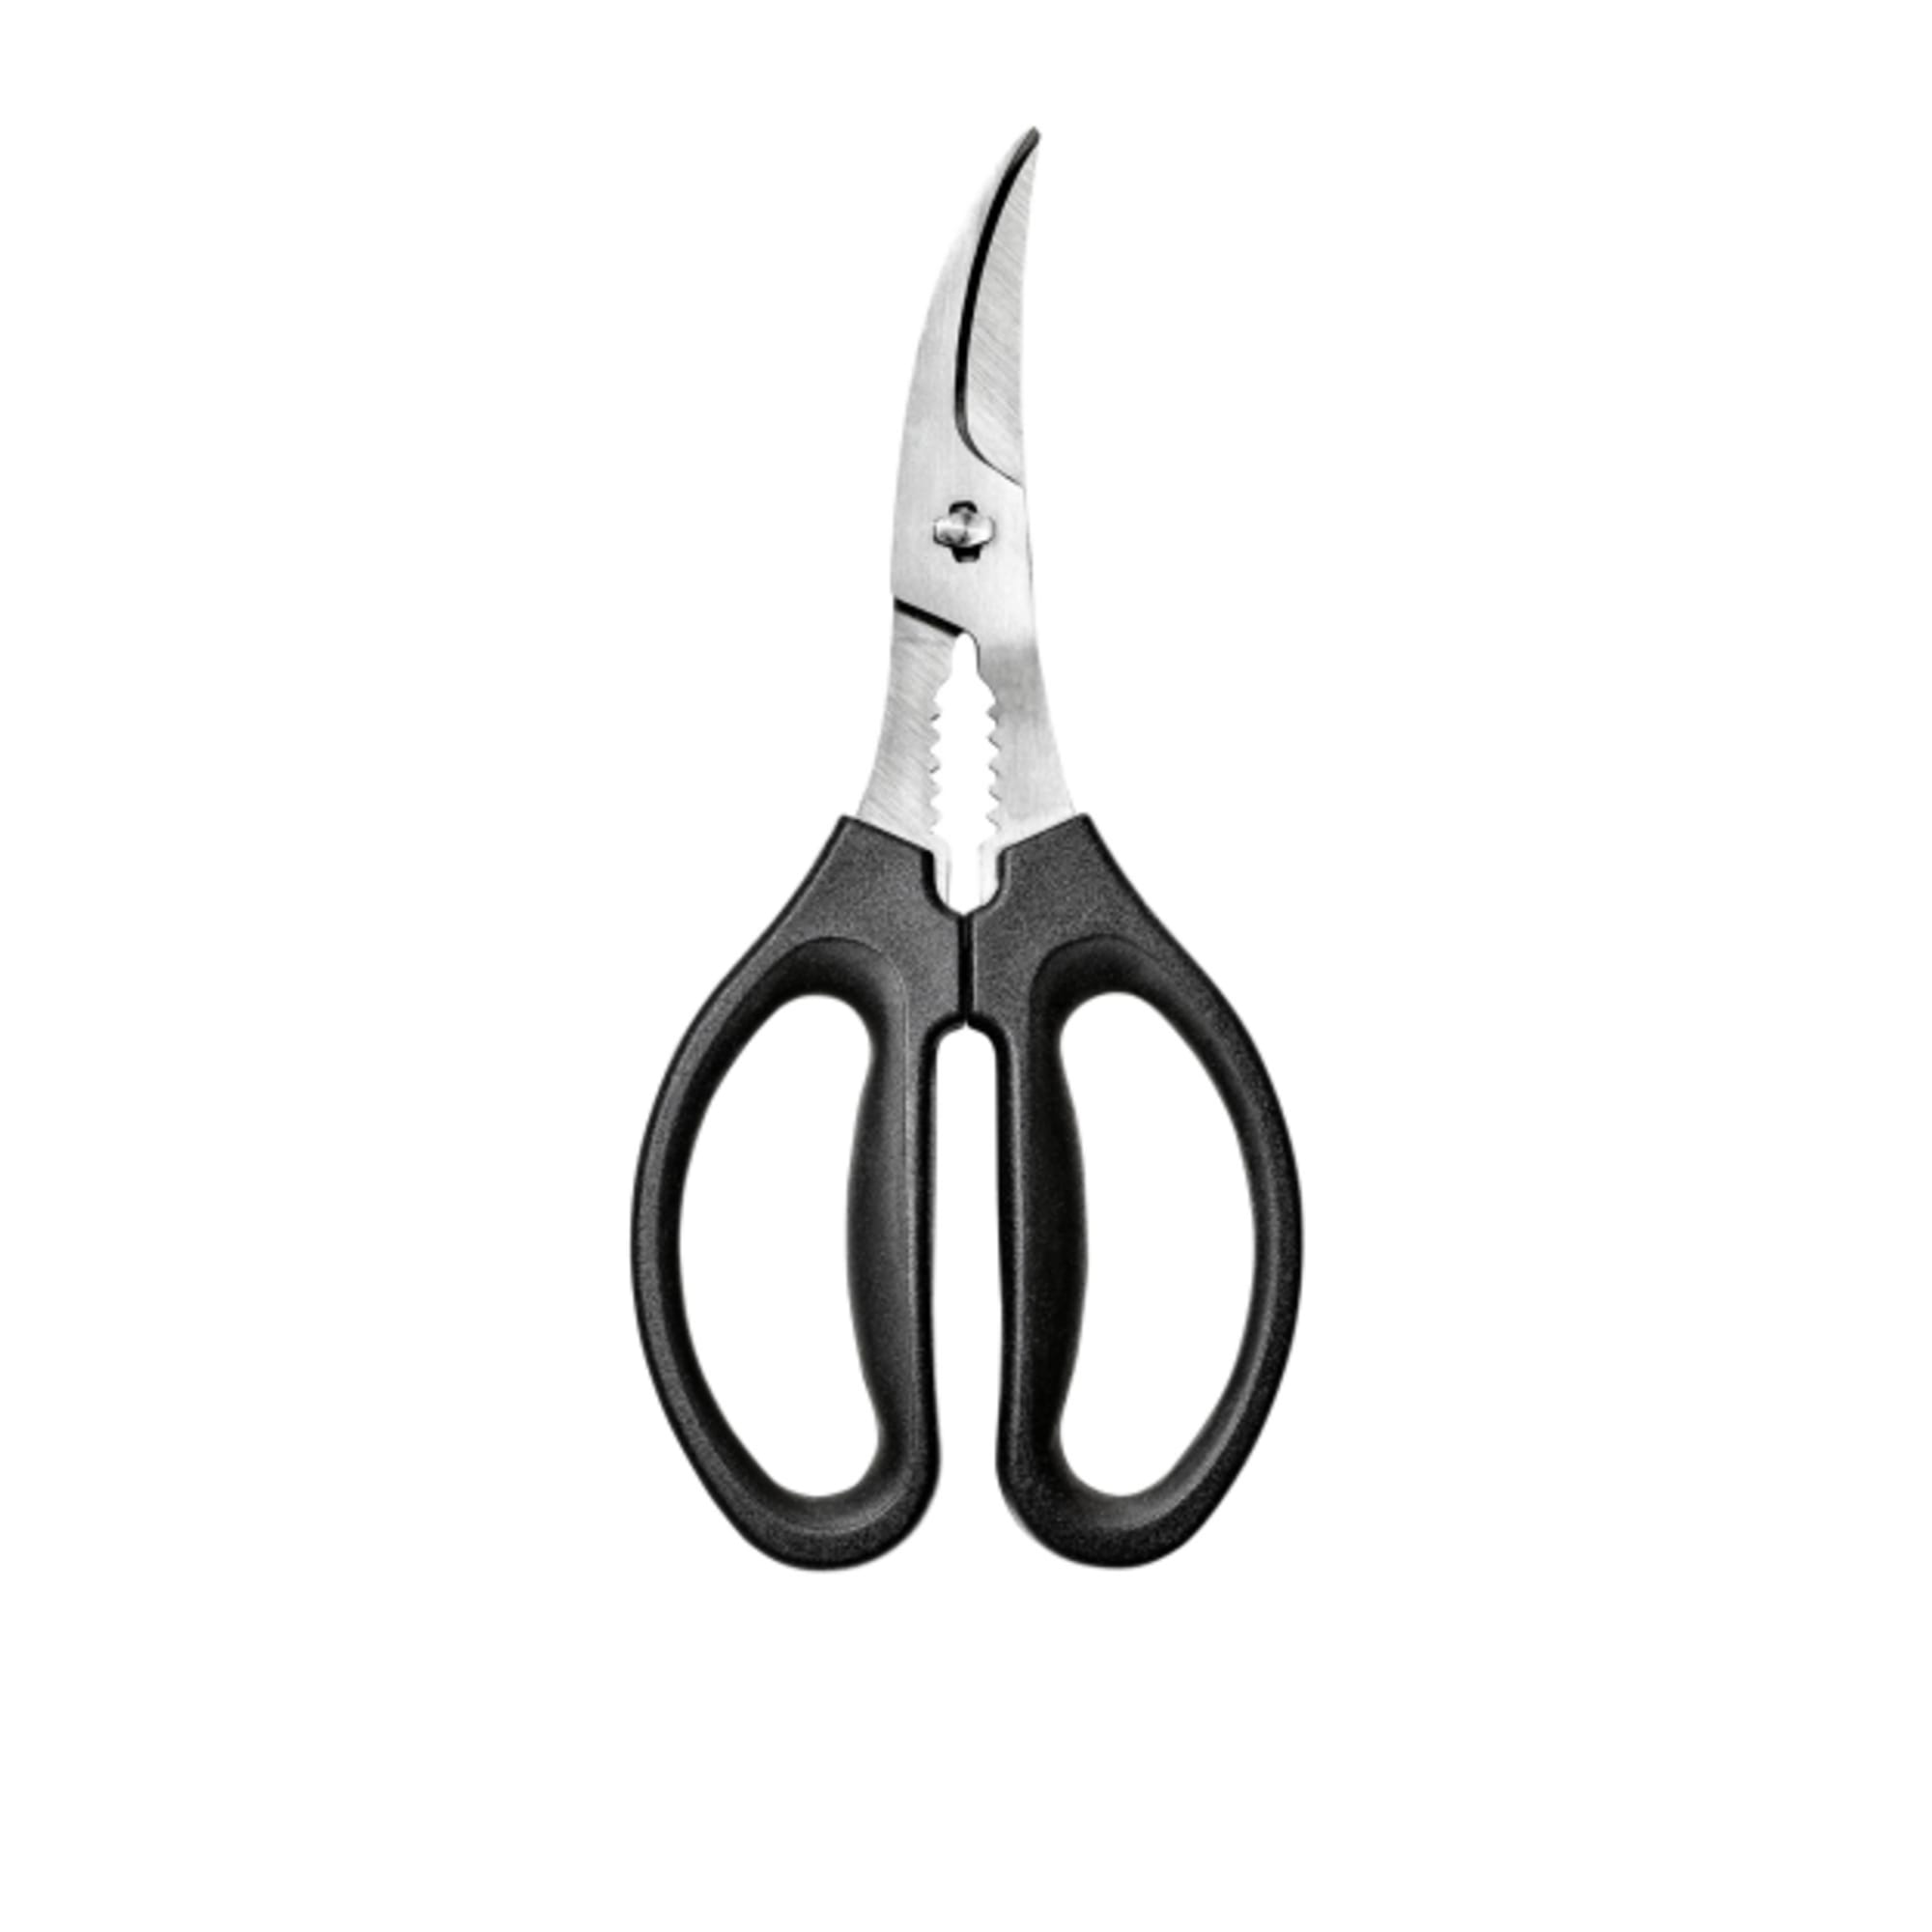 https://res.cloudinary.com/kitchenwarehouse/image/upload/c_fill,g_face,w_625/f_auto/t_PDP_2000x2000/Supplier%20Images%20/2000px/OXO-Good-Grips-Seafood-Scissors_1_2000px.jpg?imagetype=pdp_gallery